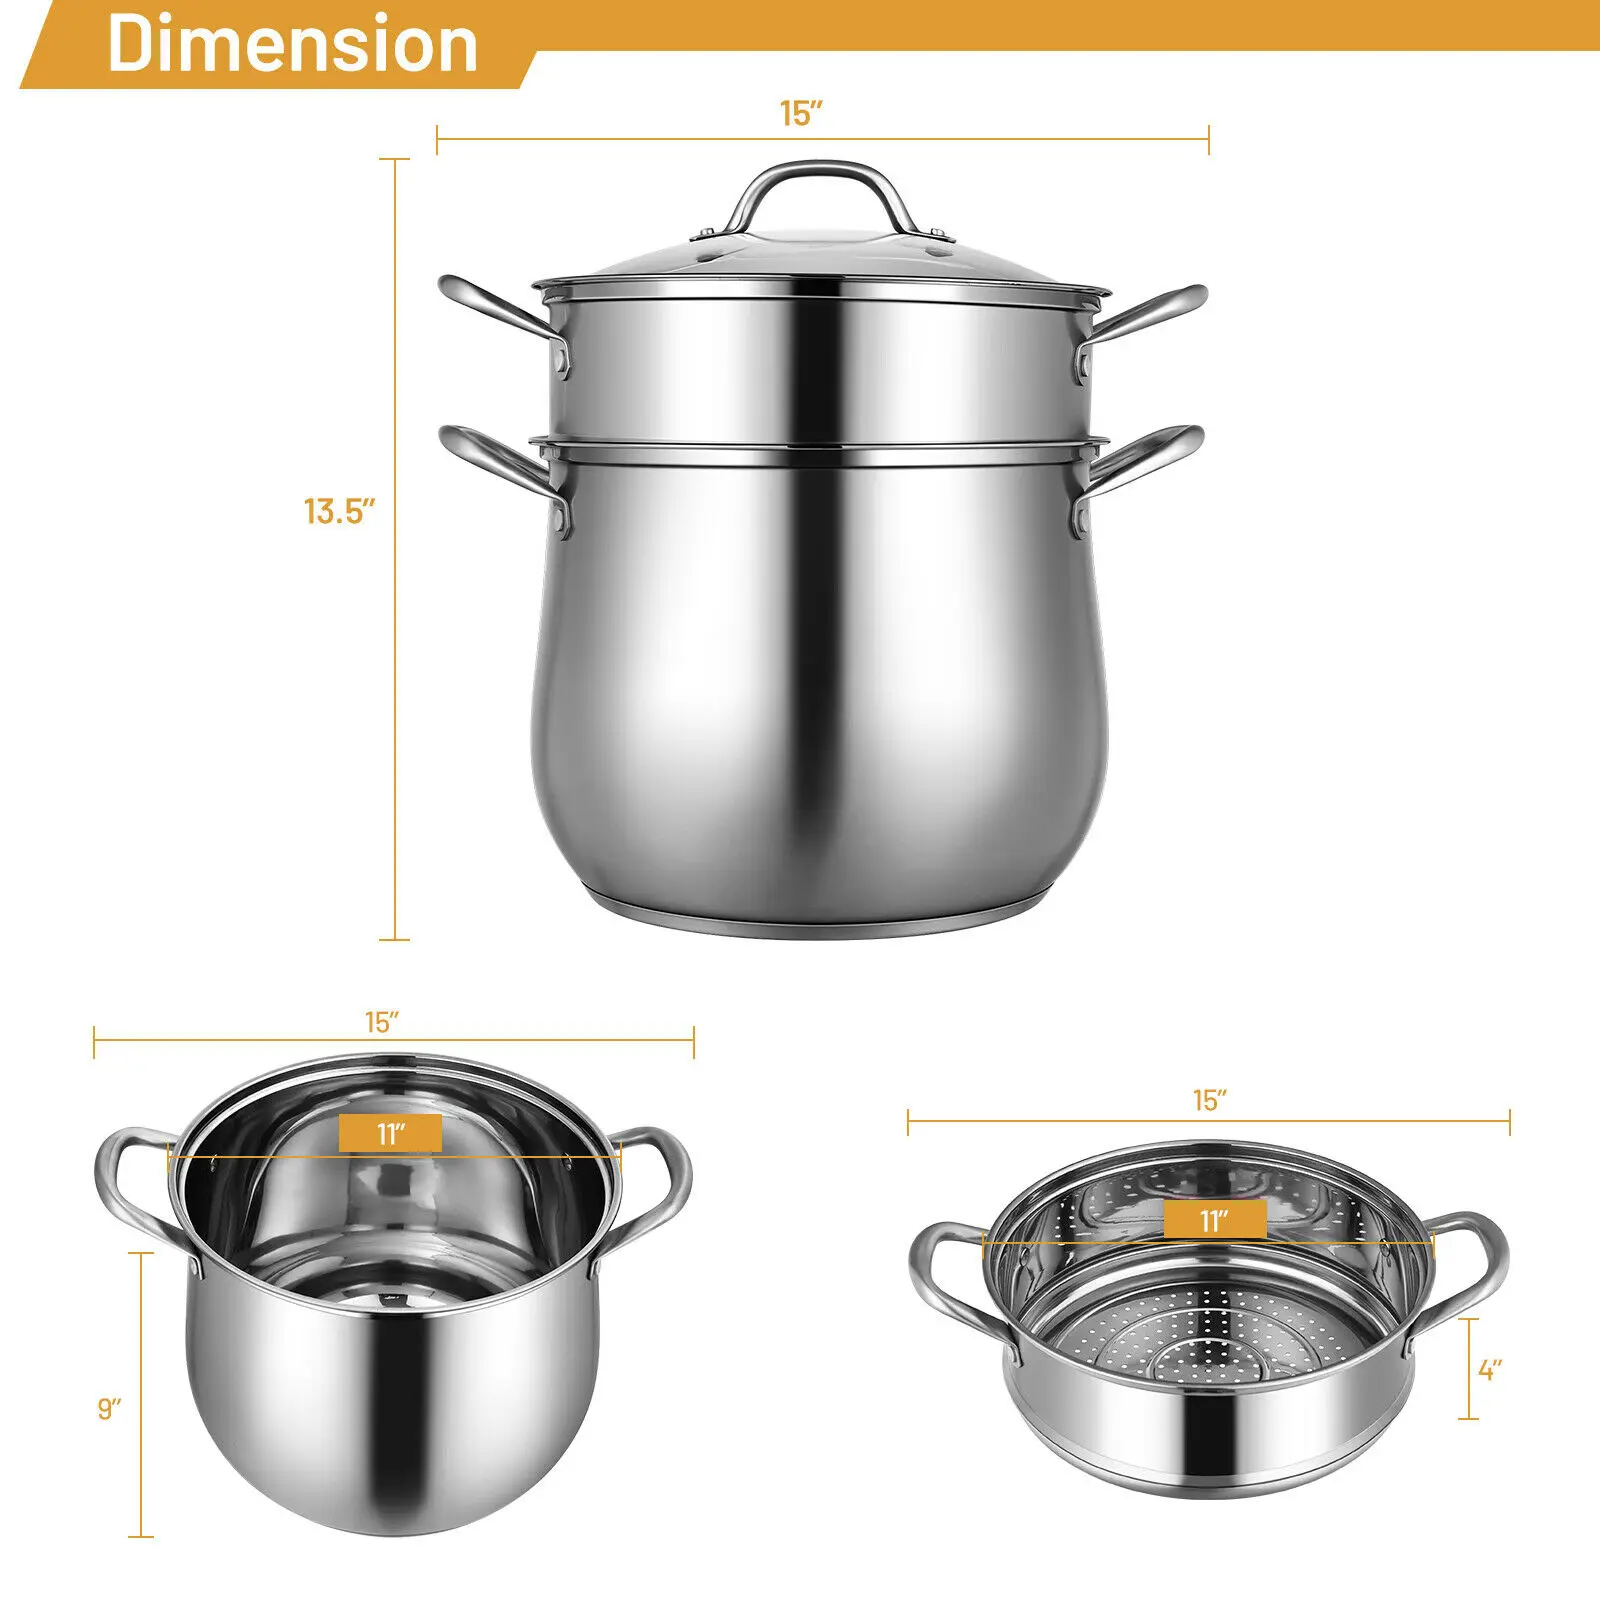 Costway 3-Tier Steamer Pot 304 Stainless Steel Steaming Cookware w